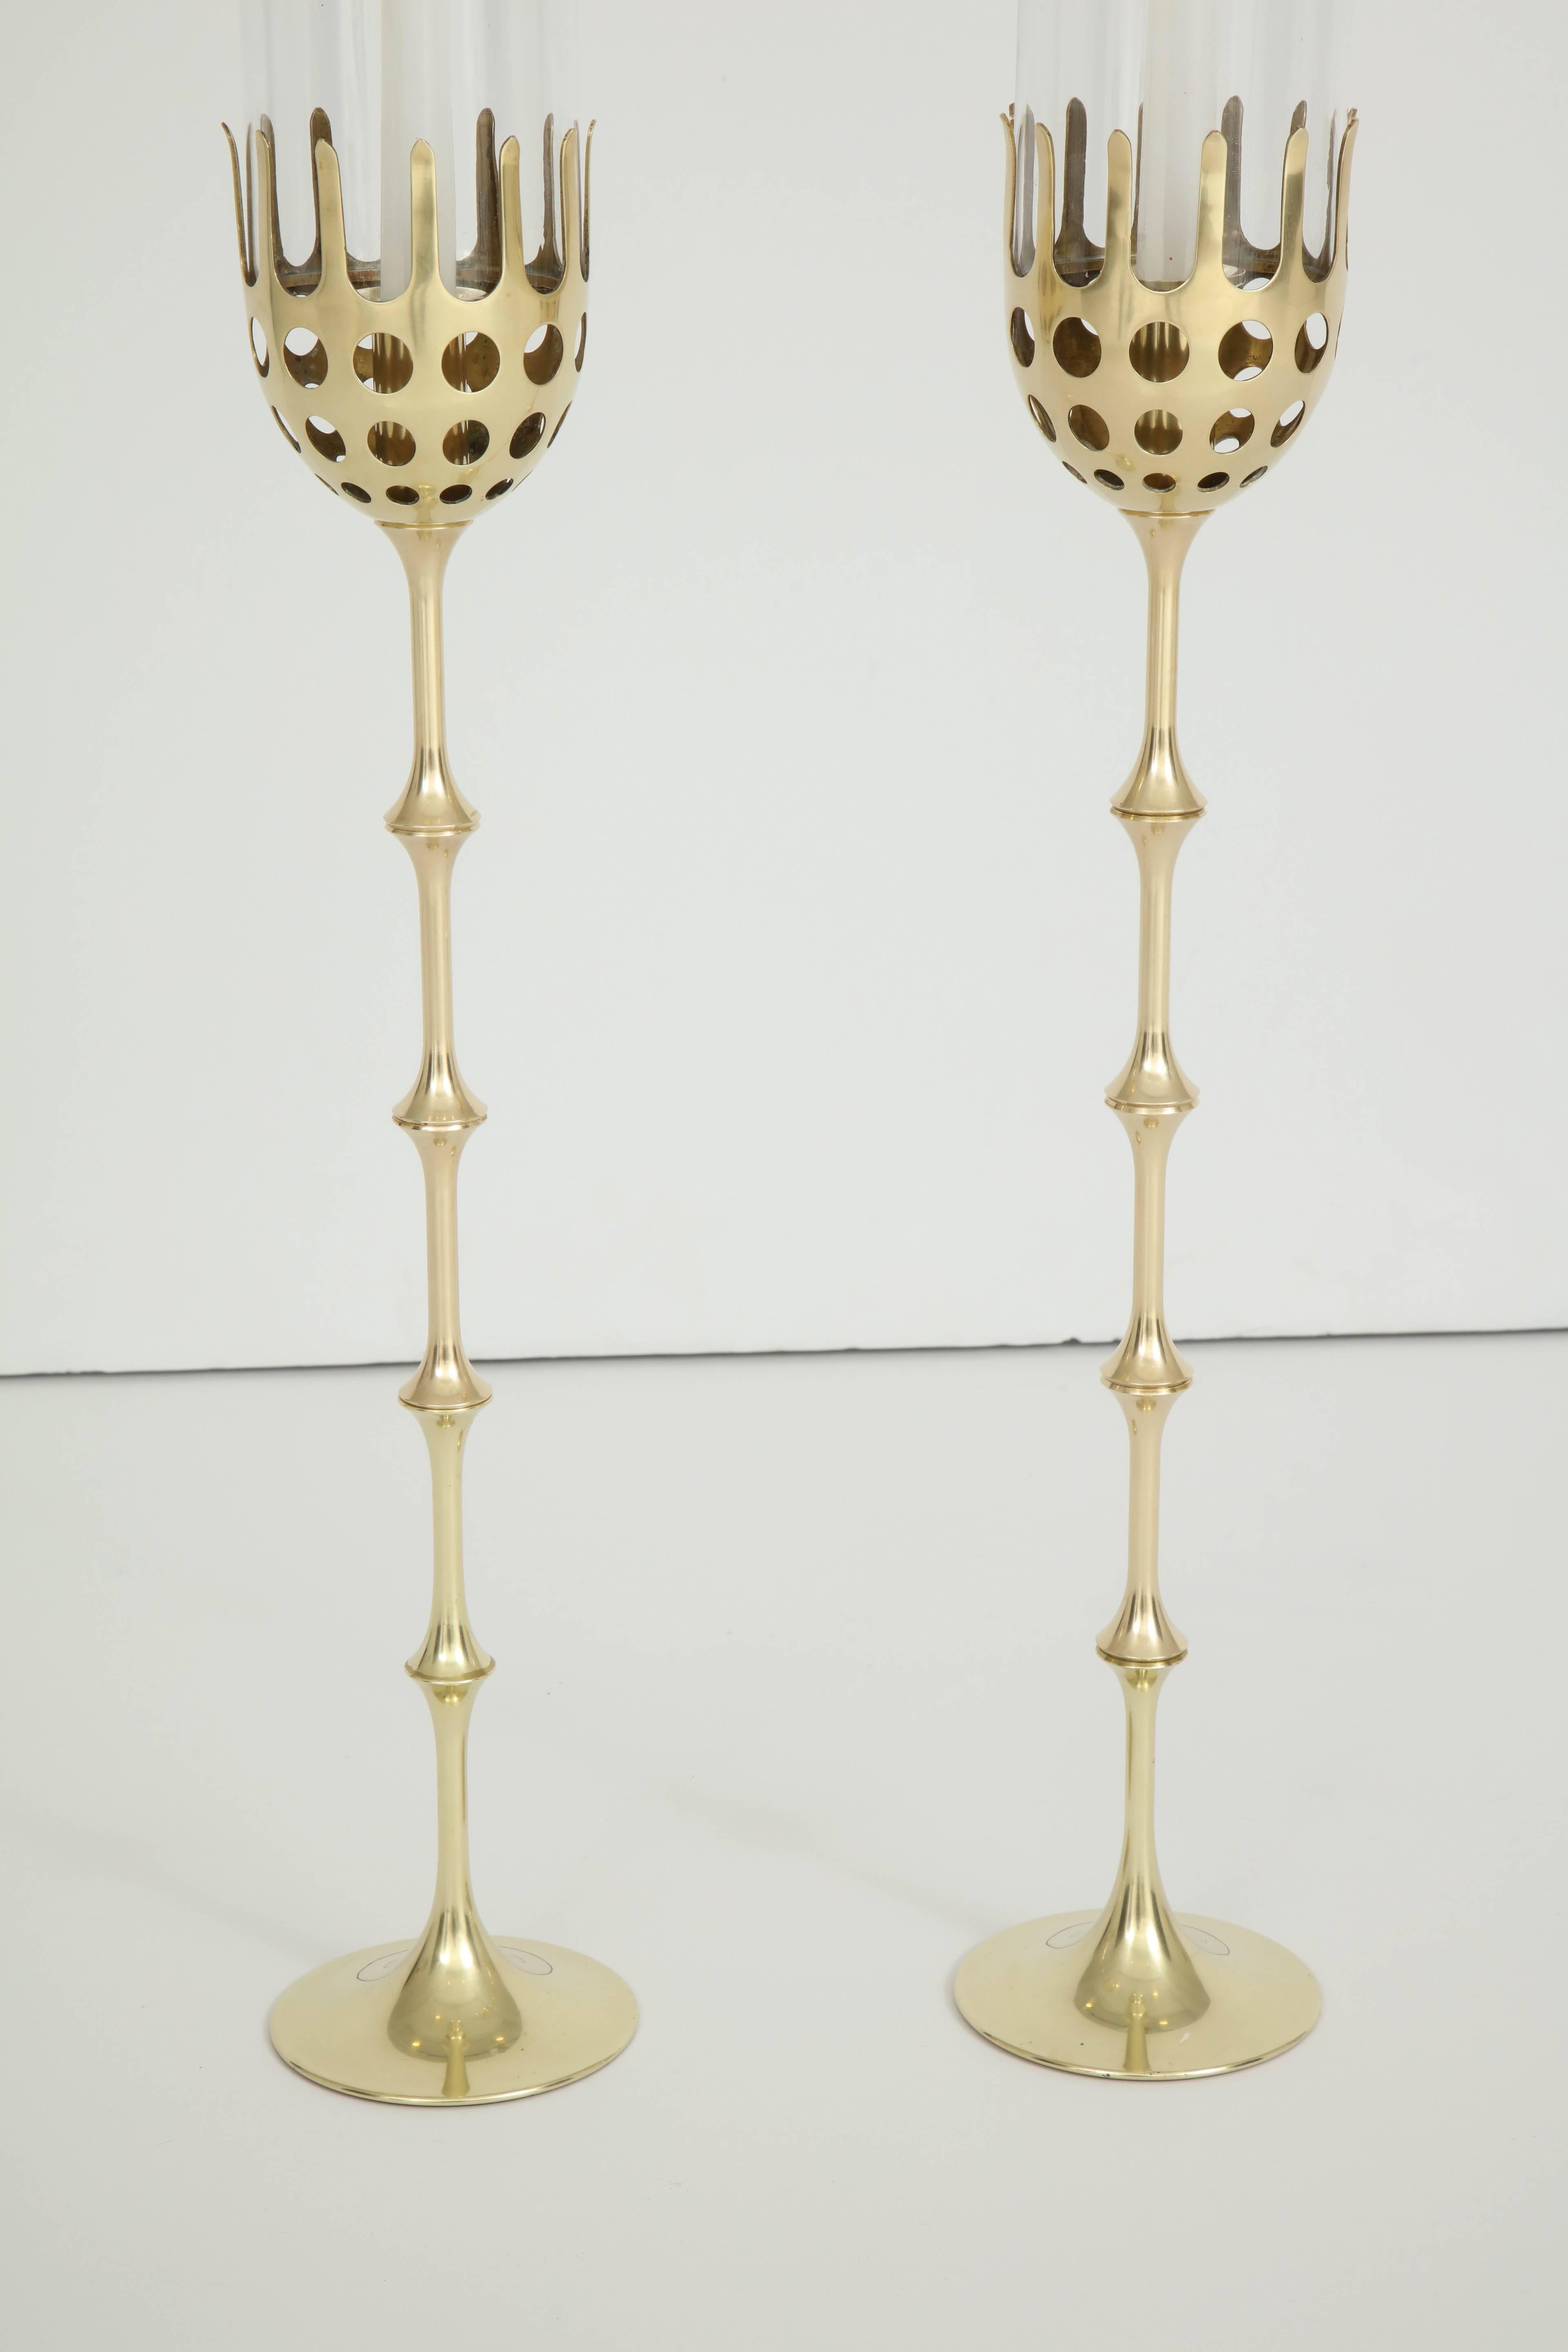 A pair of Bjorn Wiinblad polished brass and glass spool candlesticks with crown form candleholders, circa 1980s, Denmark. The spools are adjustable to create different heights.